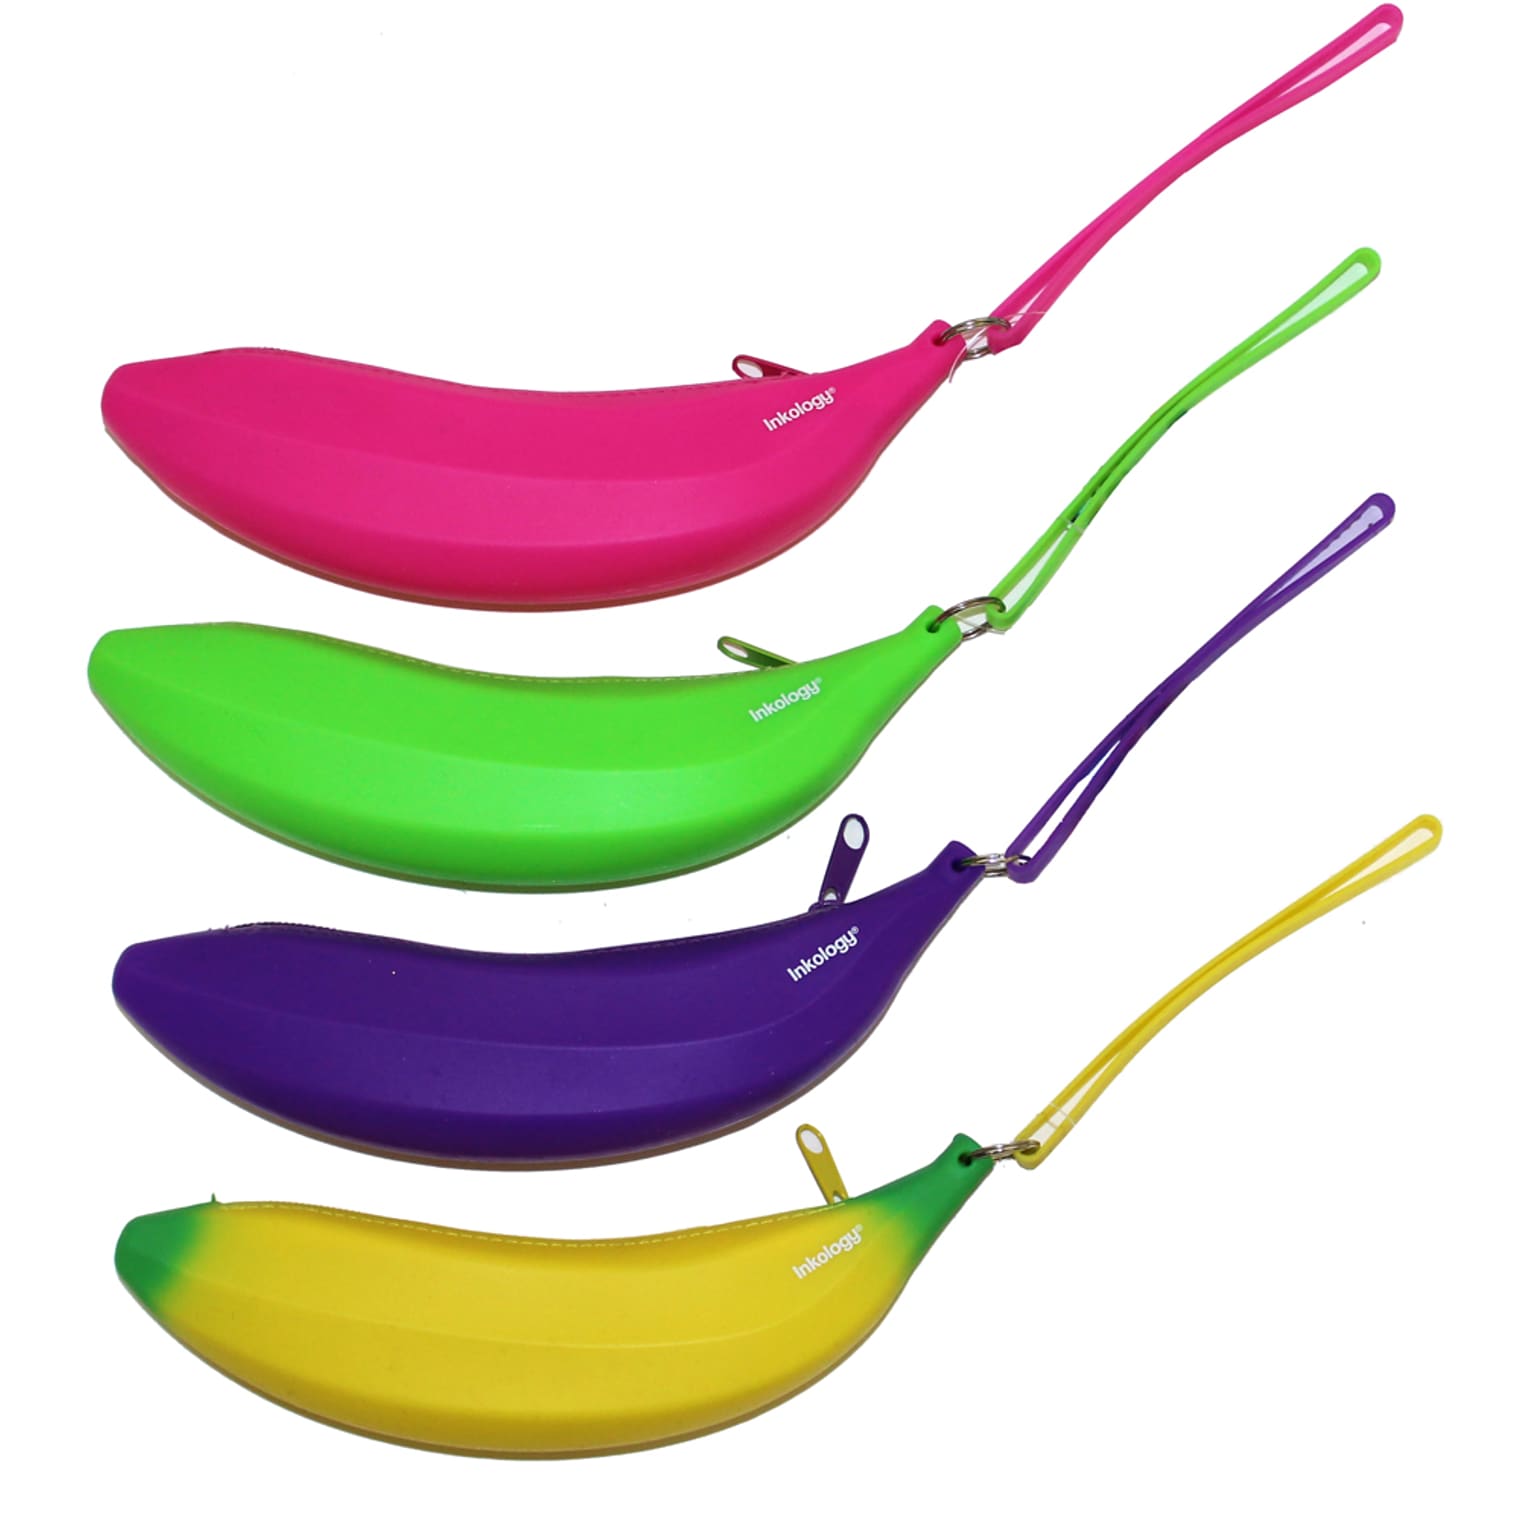 Inkology Banana Silicone Pencil Pouch, Assorted, 6 Pack (4776)